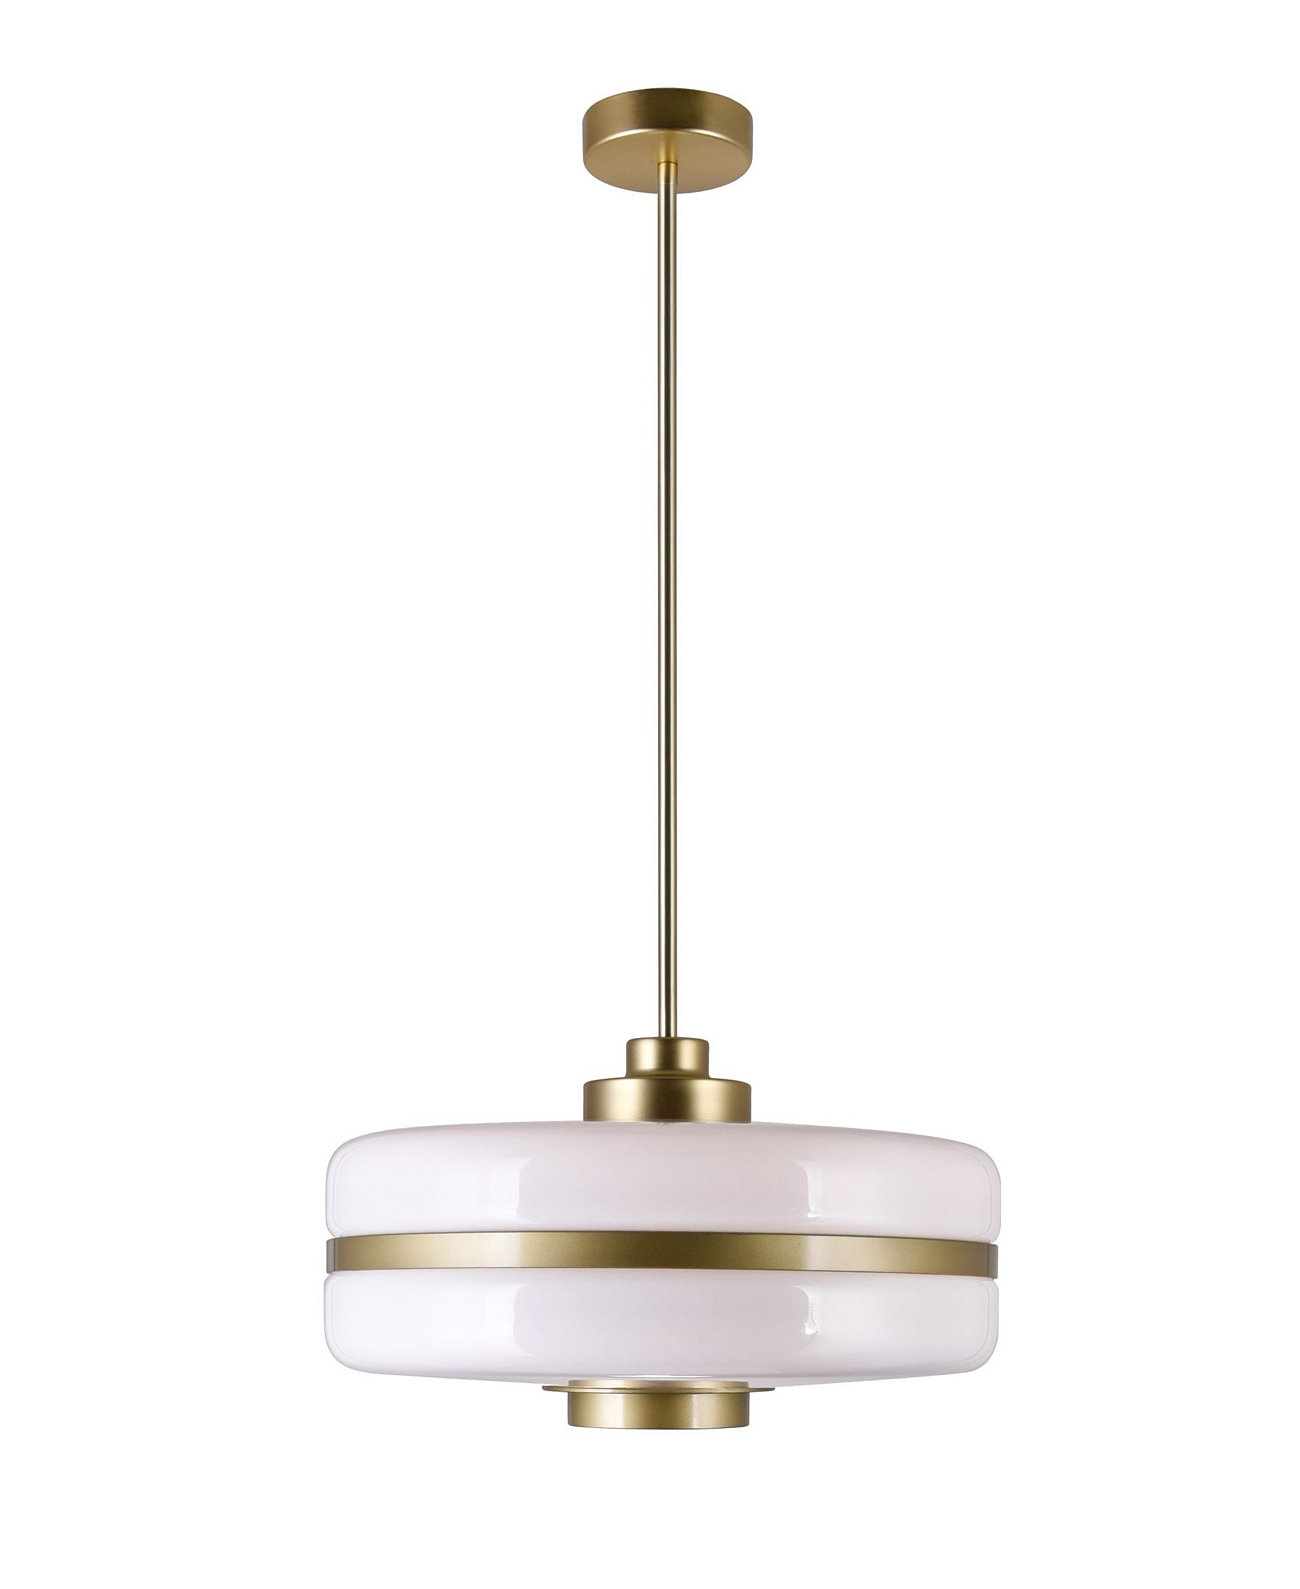 One Light Pendant in Pearl Gold. Elements lighting